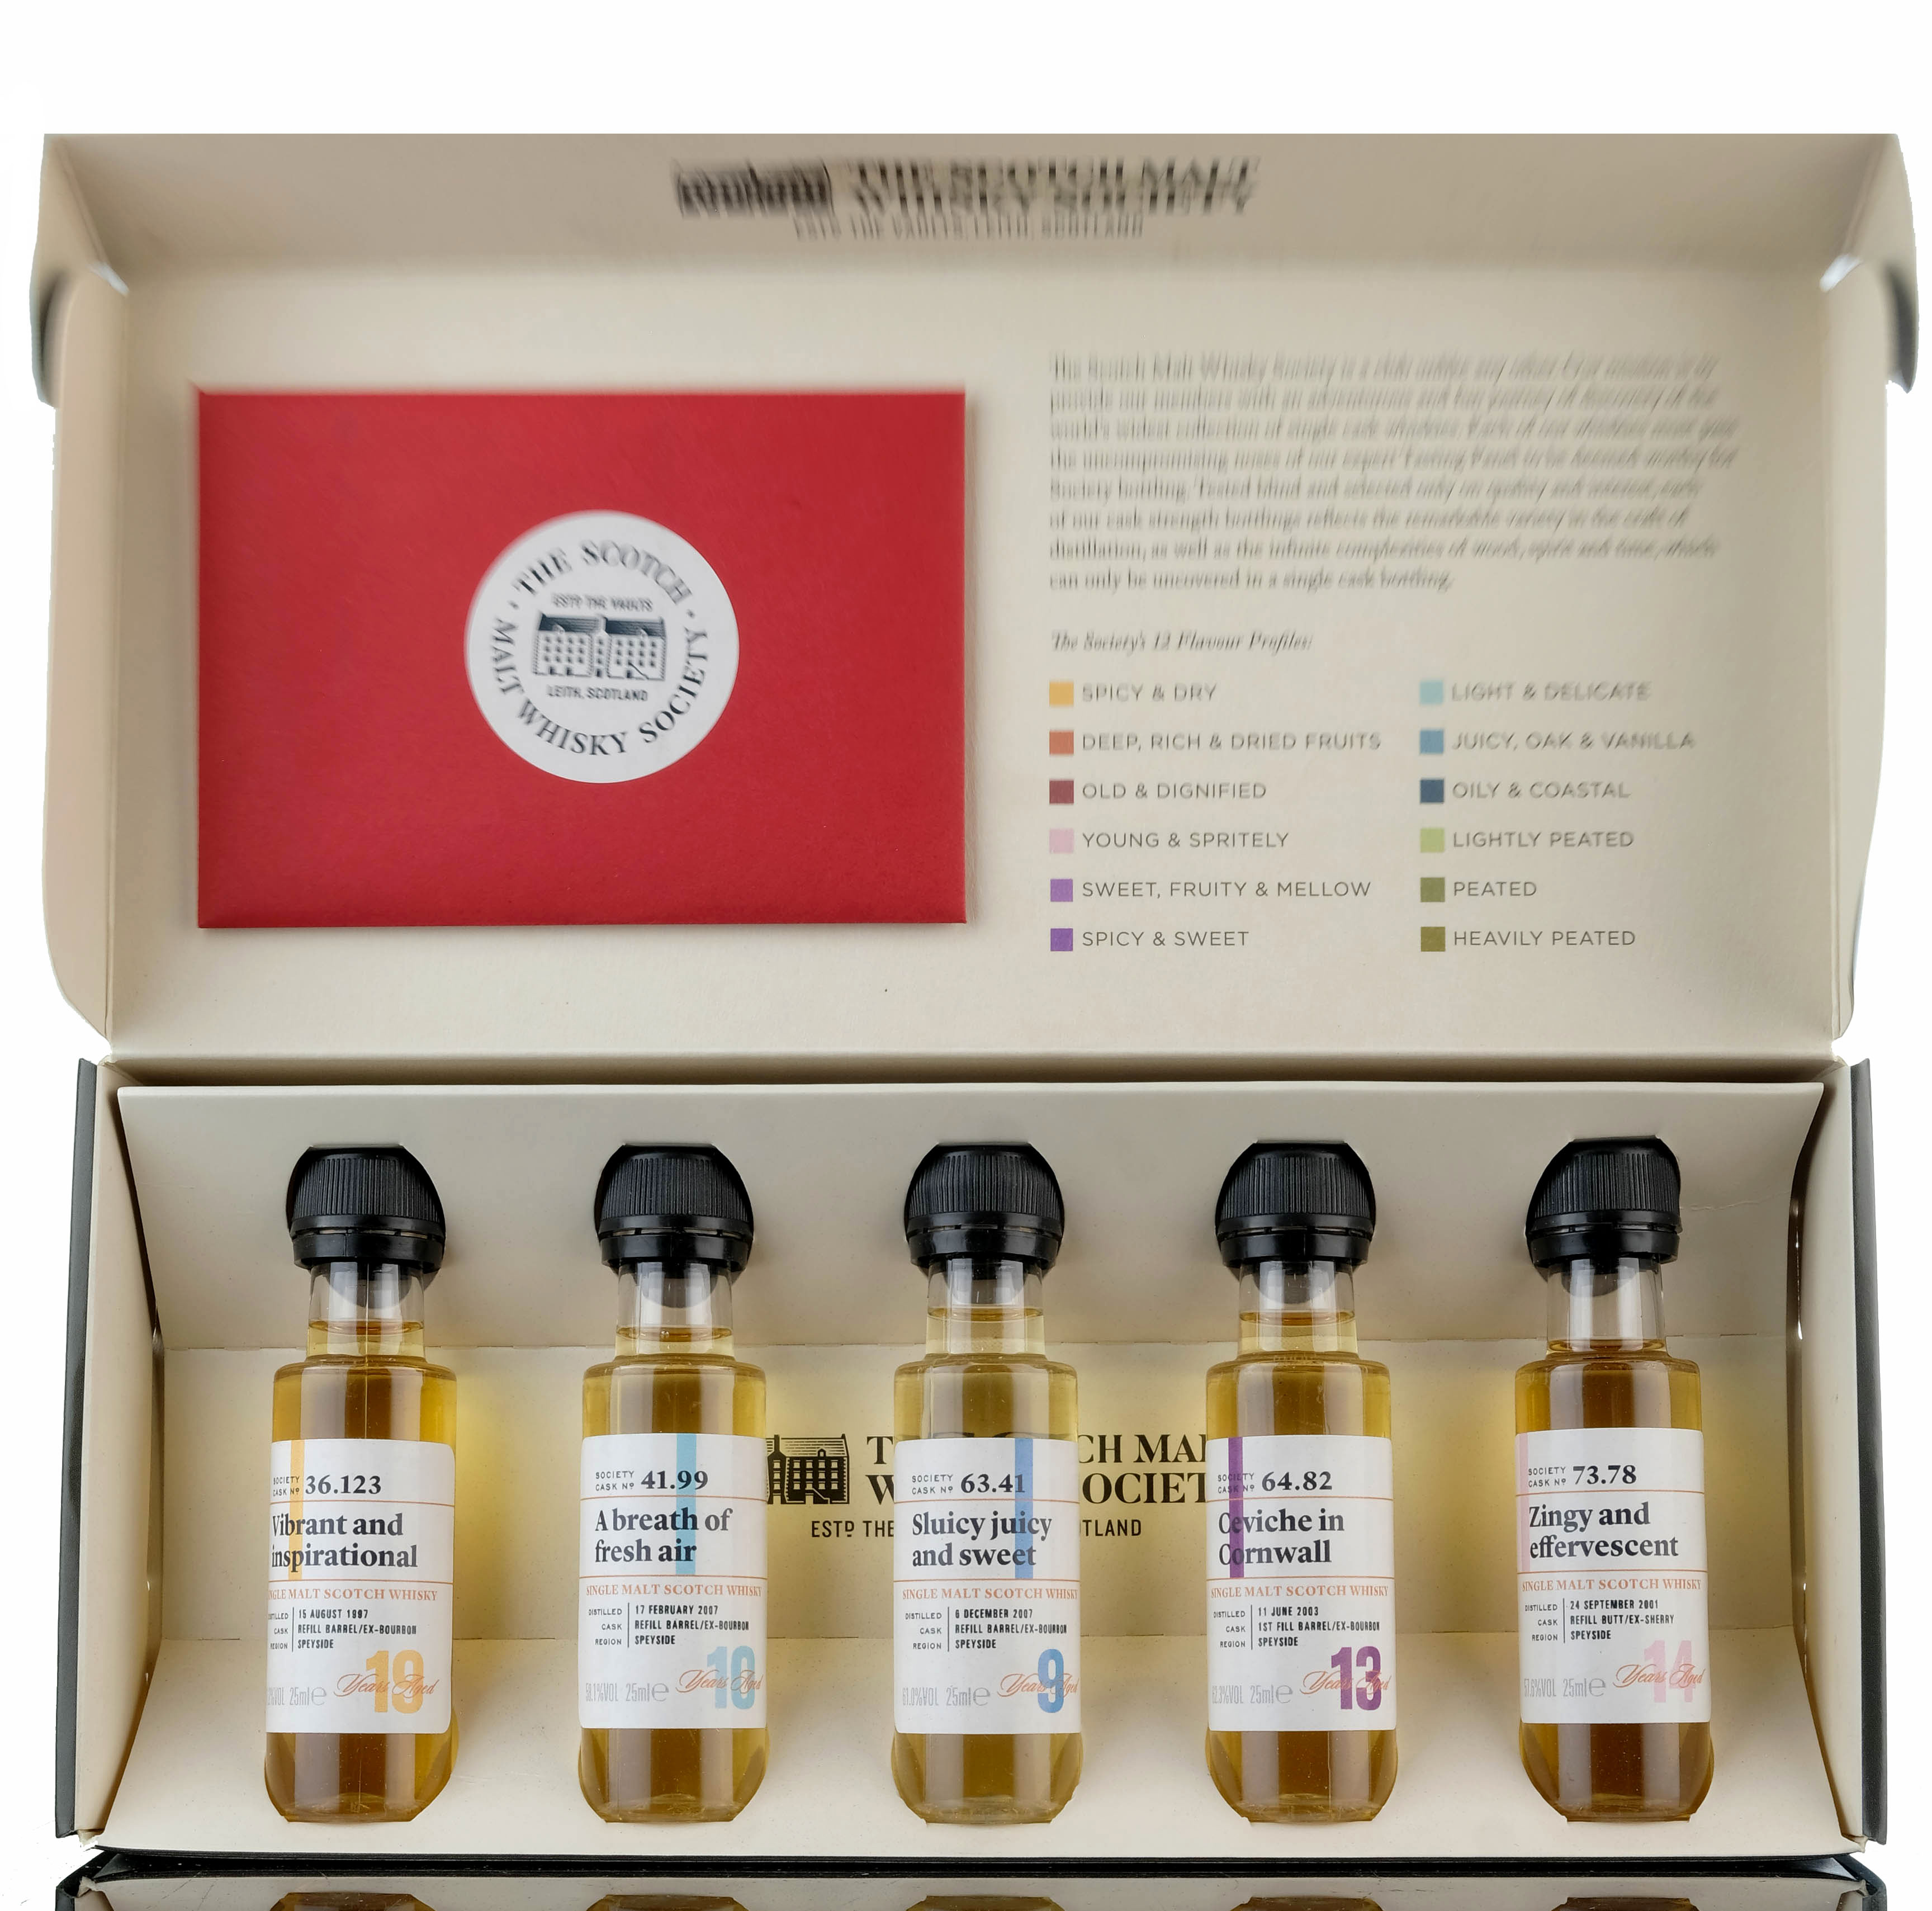 SMWS Sample Collection